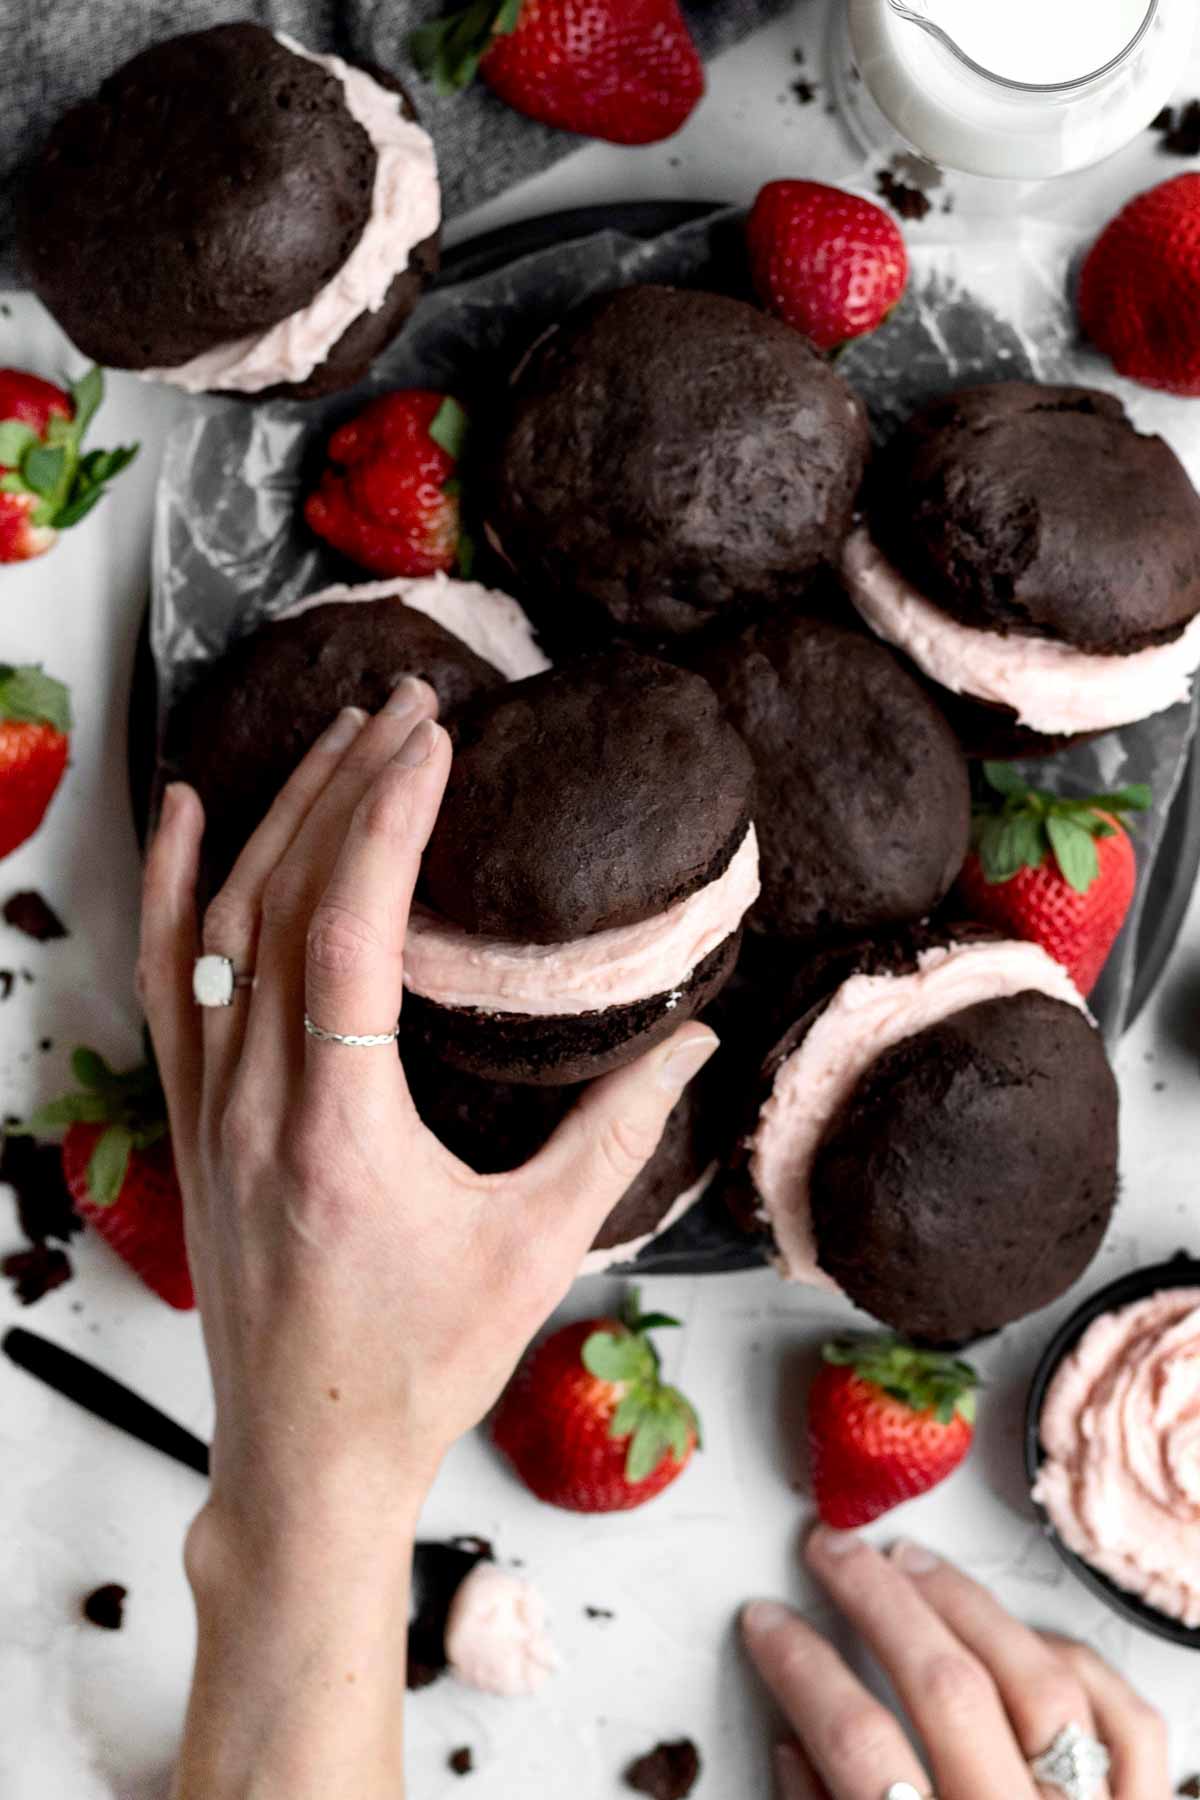 A lady’s hand reaches for a gluten free Whoopie Pie.